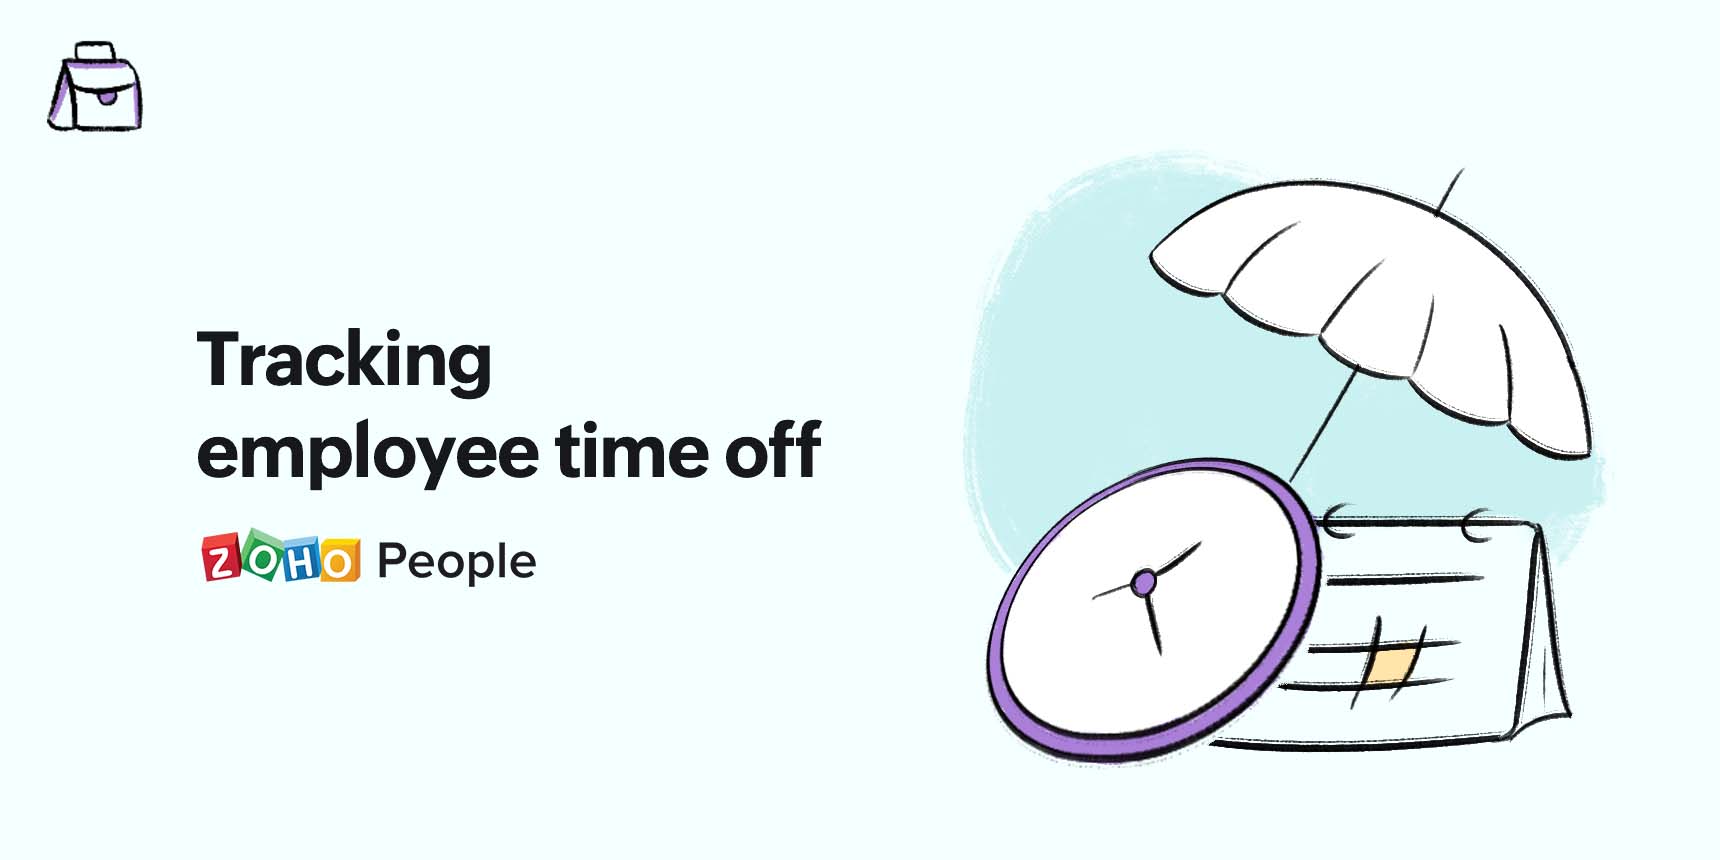 Here's how organizations can track employee time off accurately